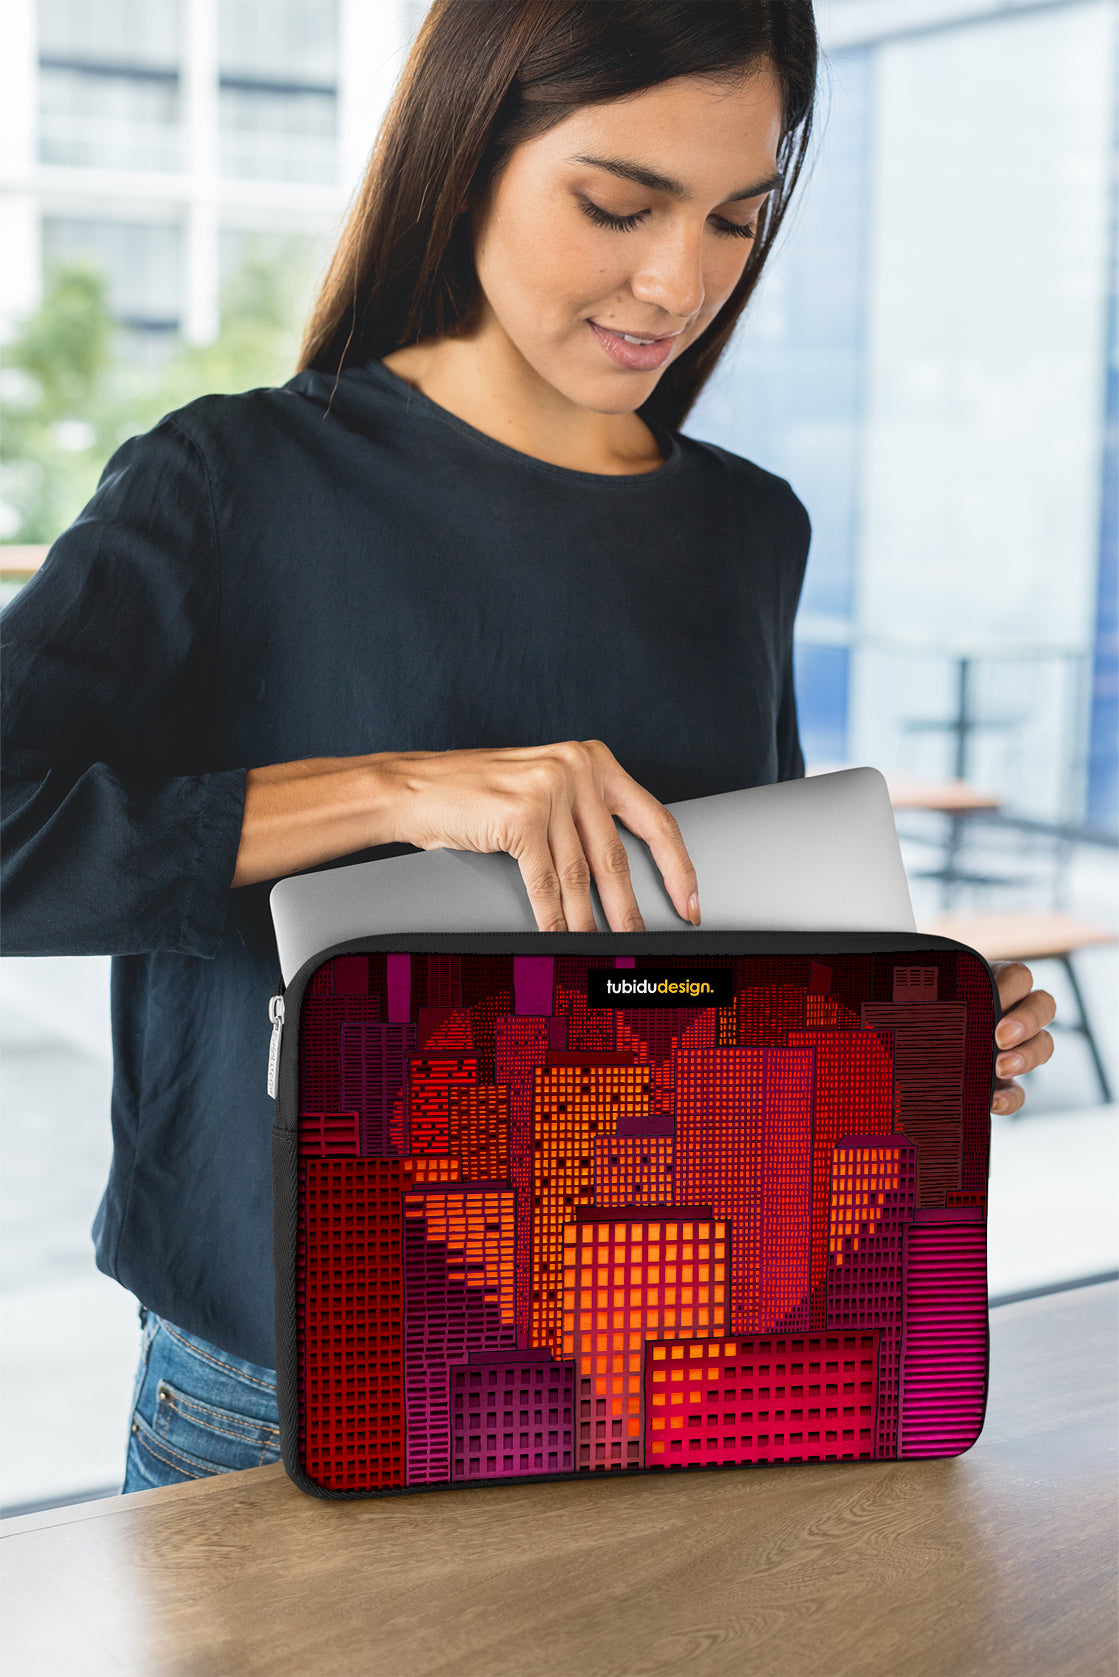 You are in my heart - Illustrated Laptop Sleeve